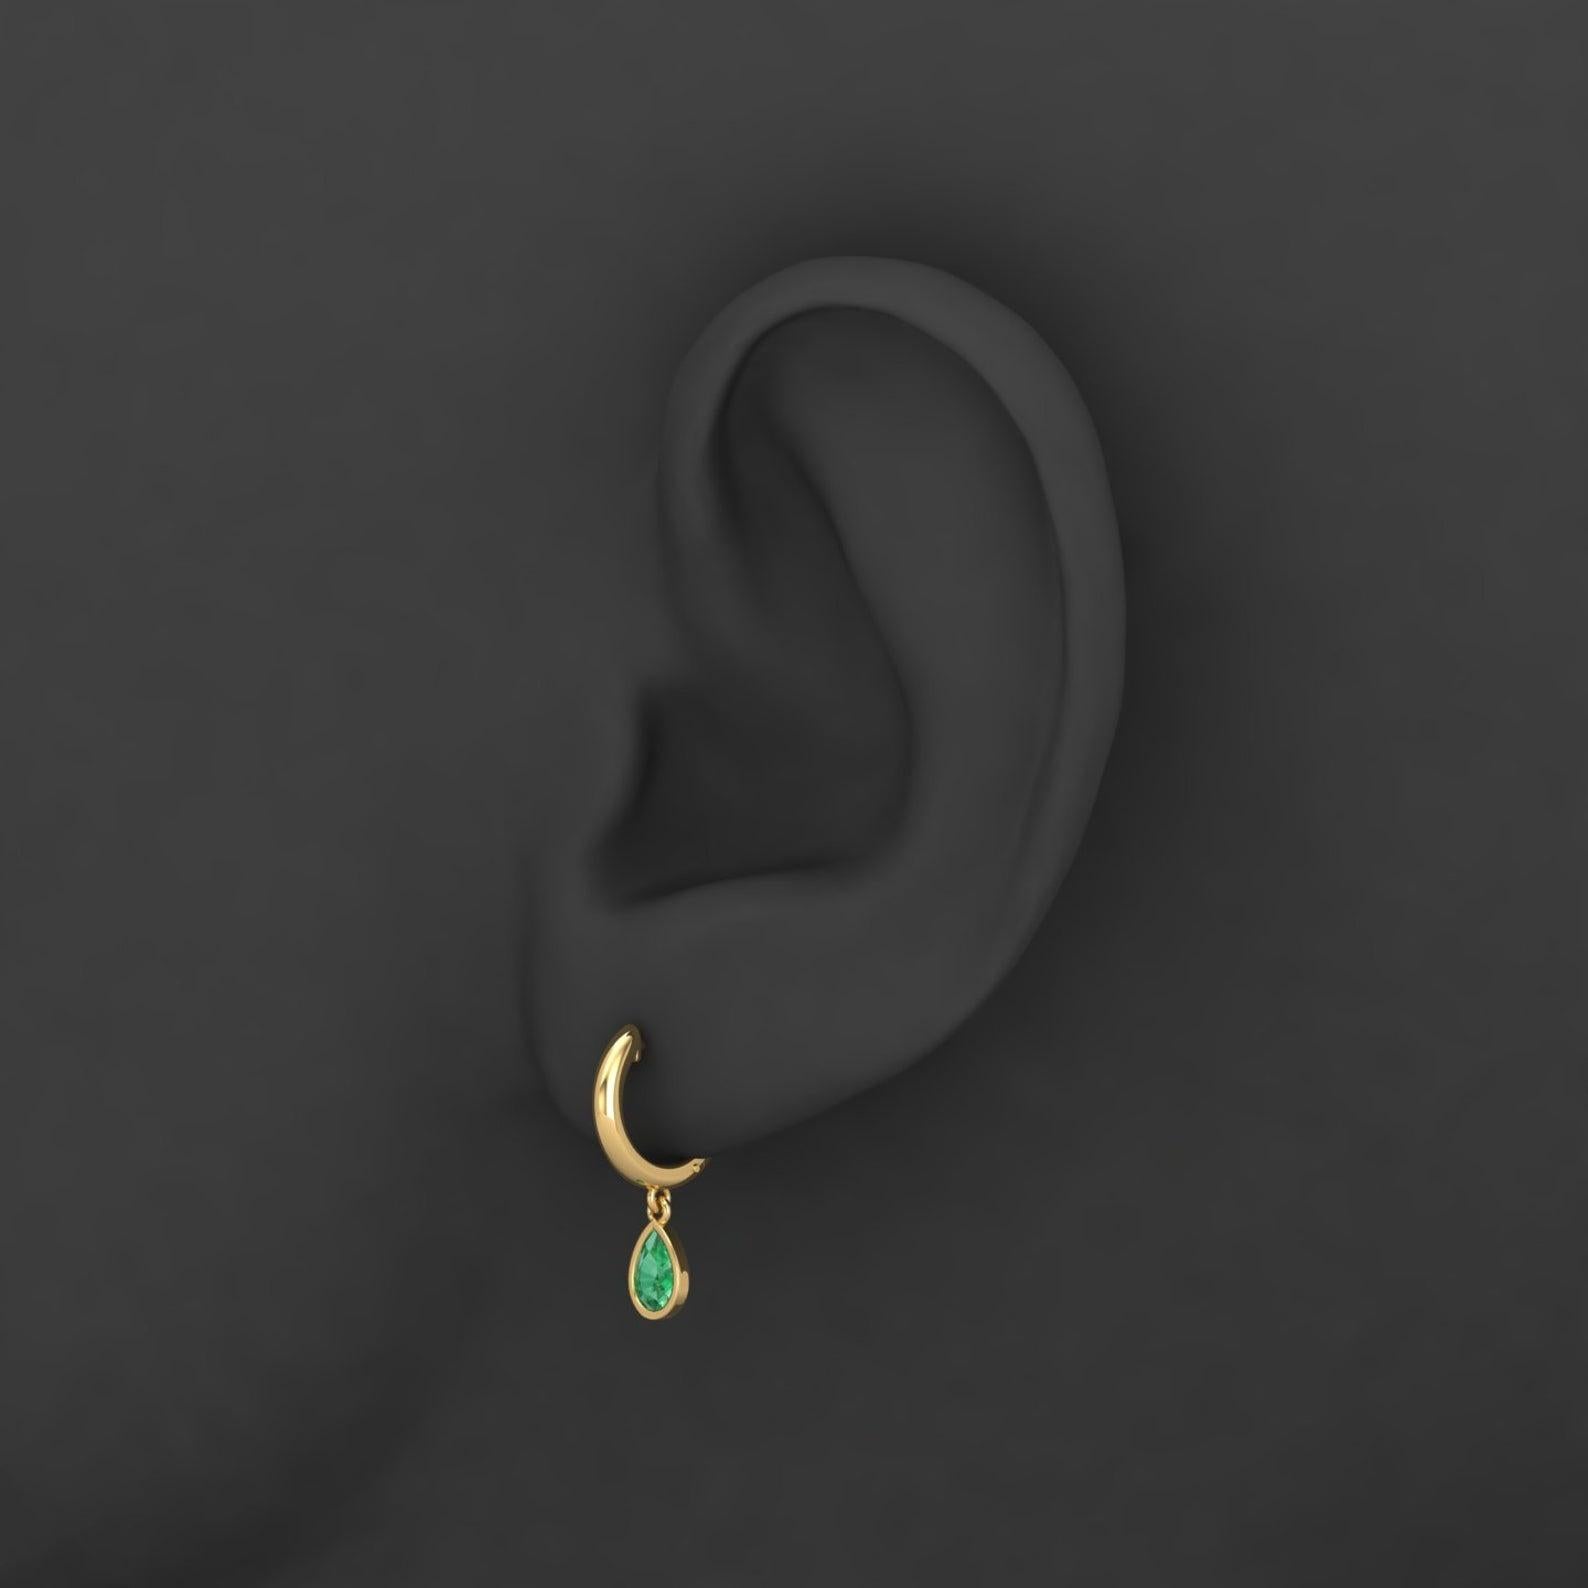 Cast in 14 karat gold. These beautiful earrings are hand set in .40 carats of emeralds. Available in yellow, rose and white gold.  Sold in a pair, can be bought as a single piece ($1600)  

FOLLOW MEGHNA JEWELS storefront to view the latest